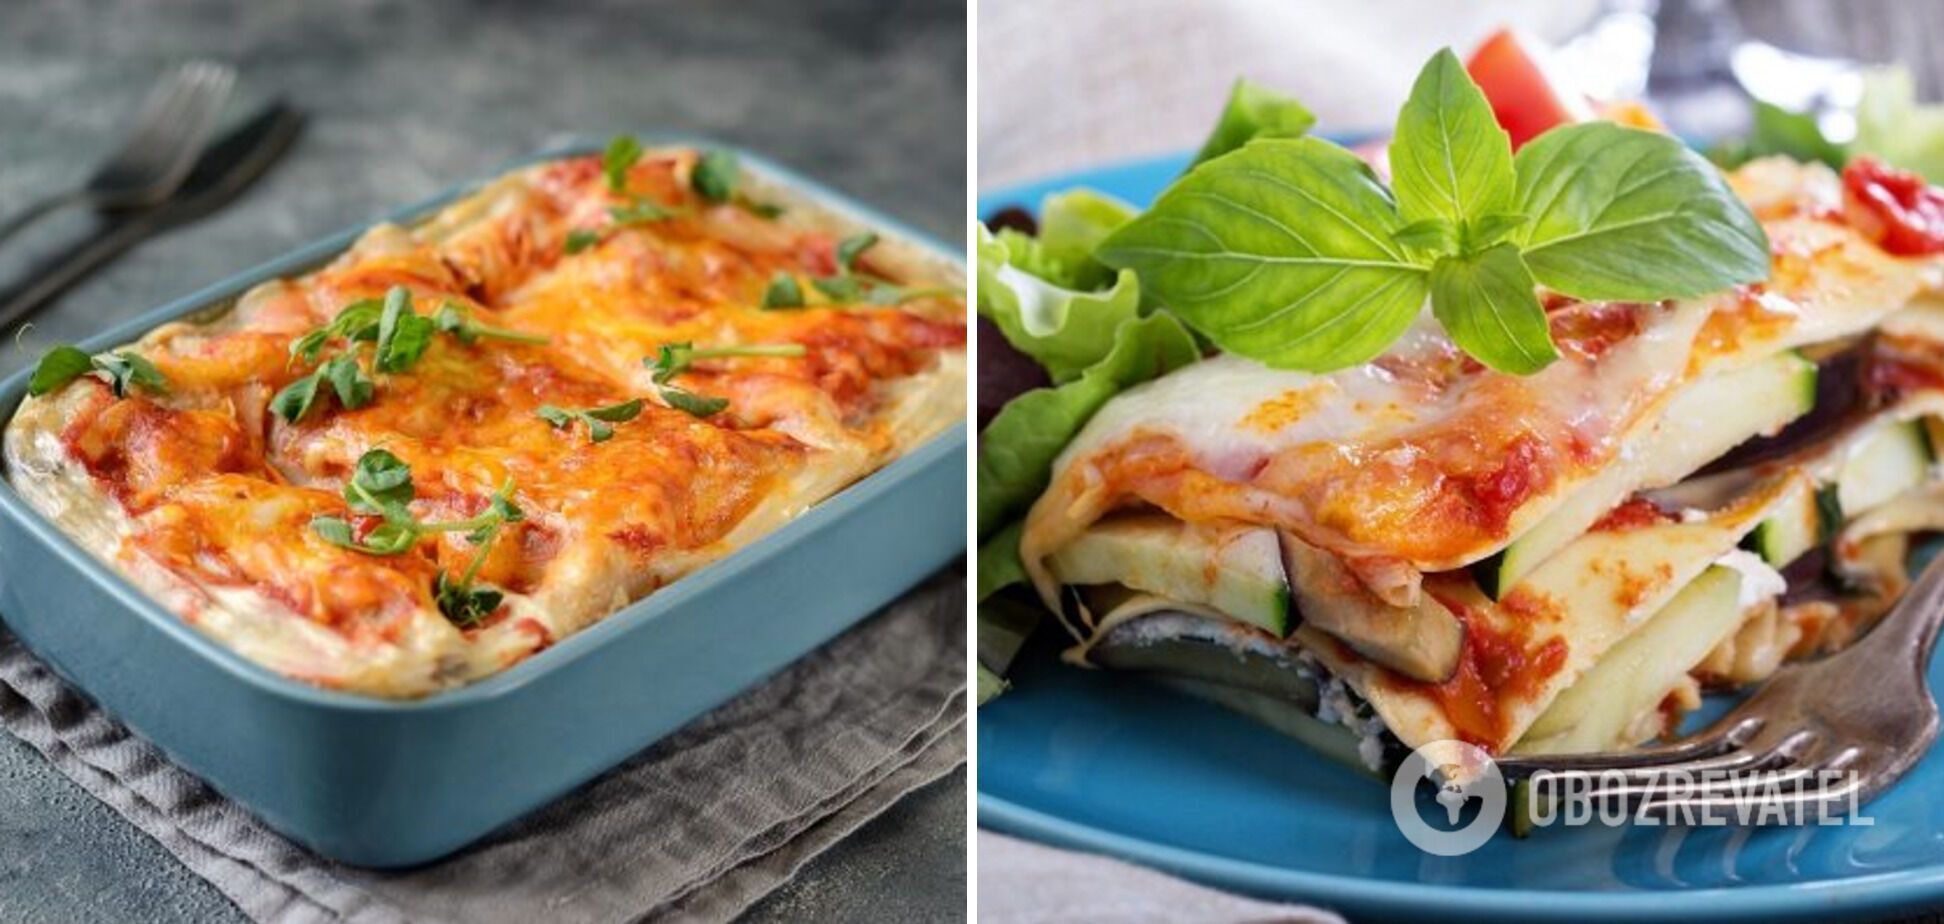 Lasagna recipe with mushrooms and meat